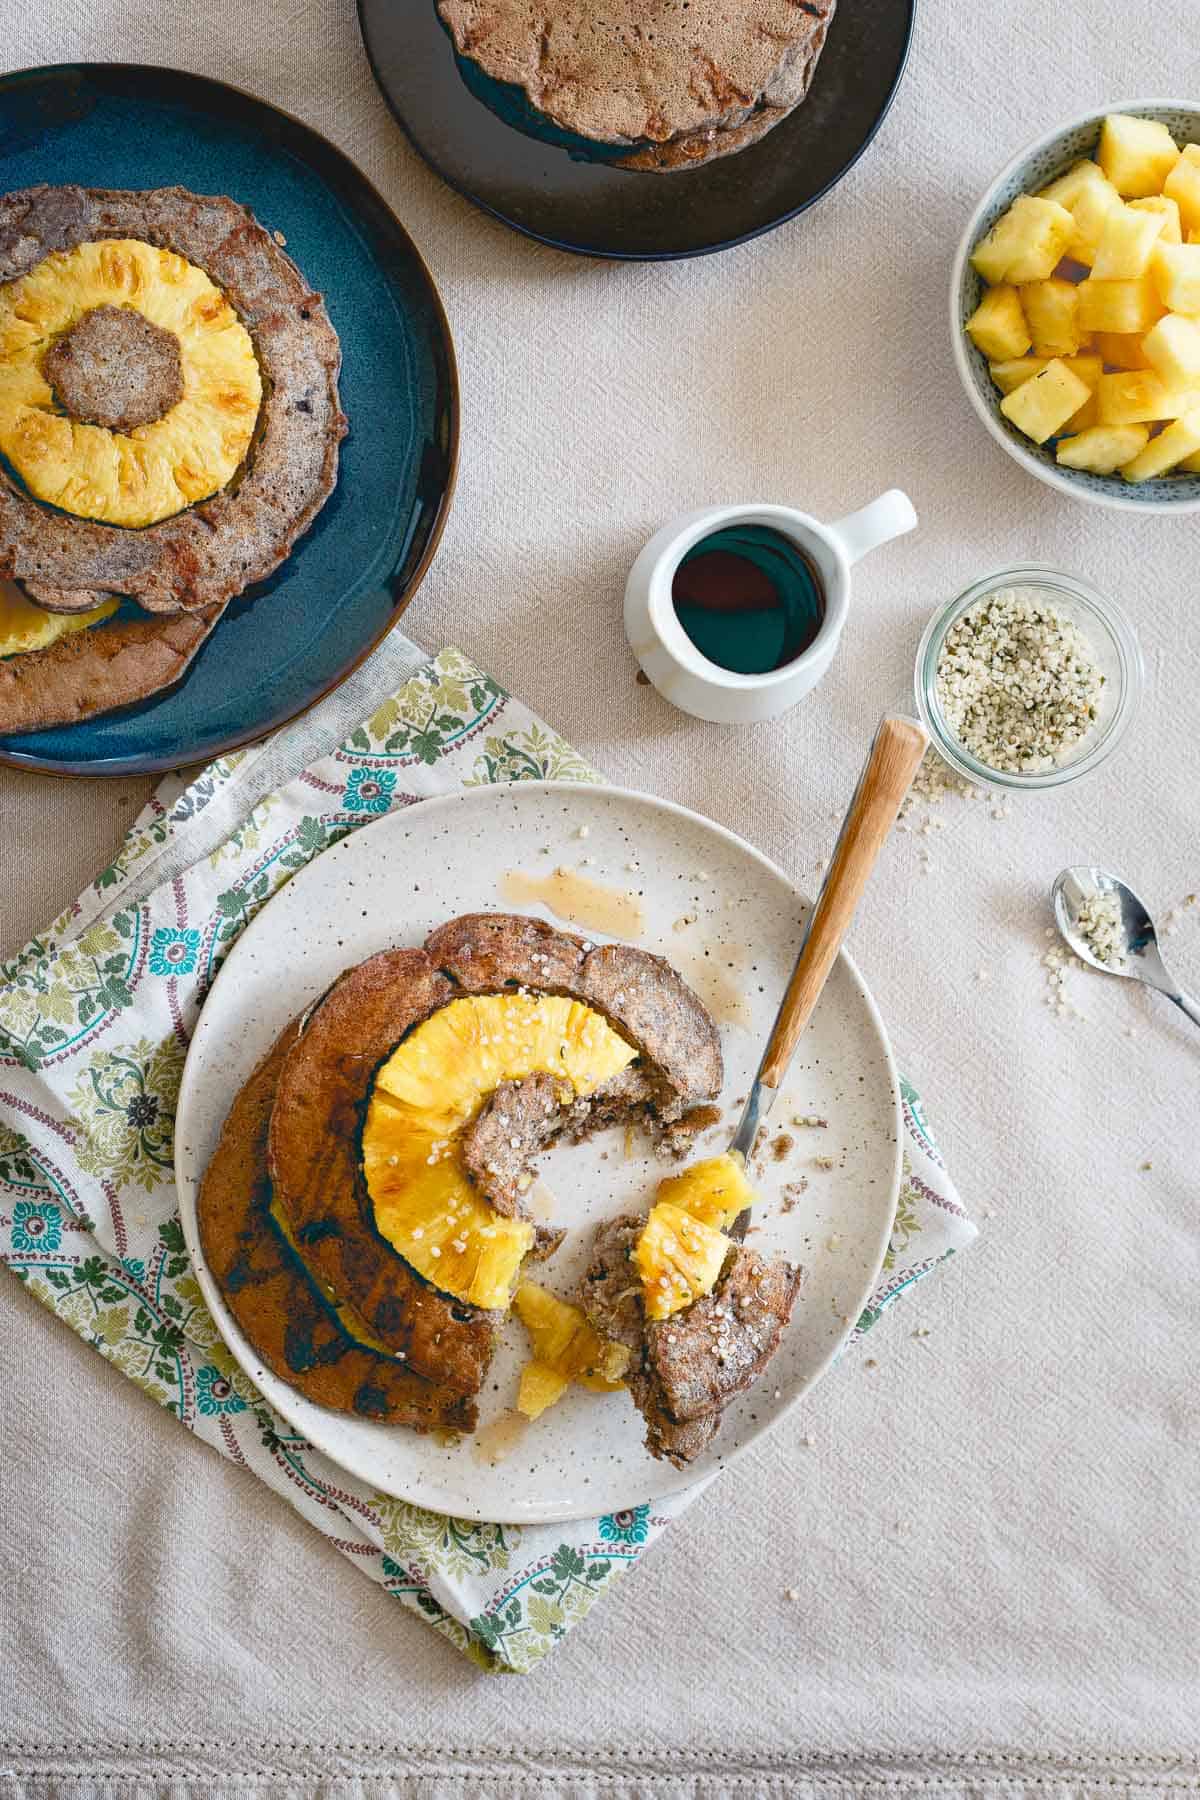 With a drizzle of maple syrup and a fresh pineapple ring in each one, these hearty buckwheat pancakes are a well balanced start to the day.